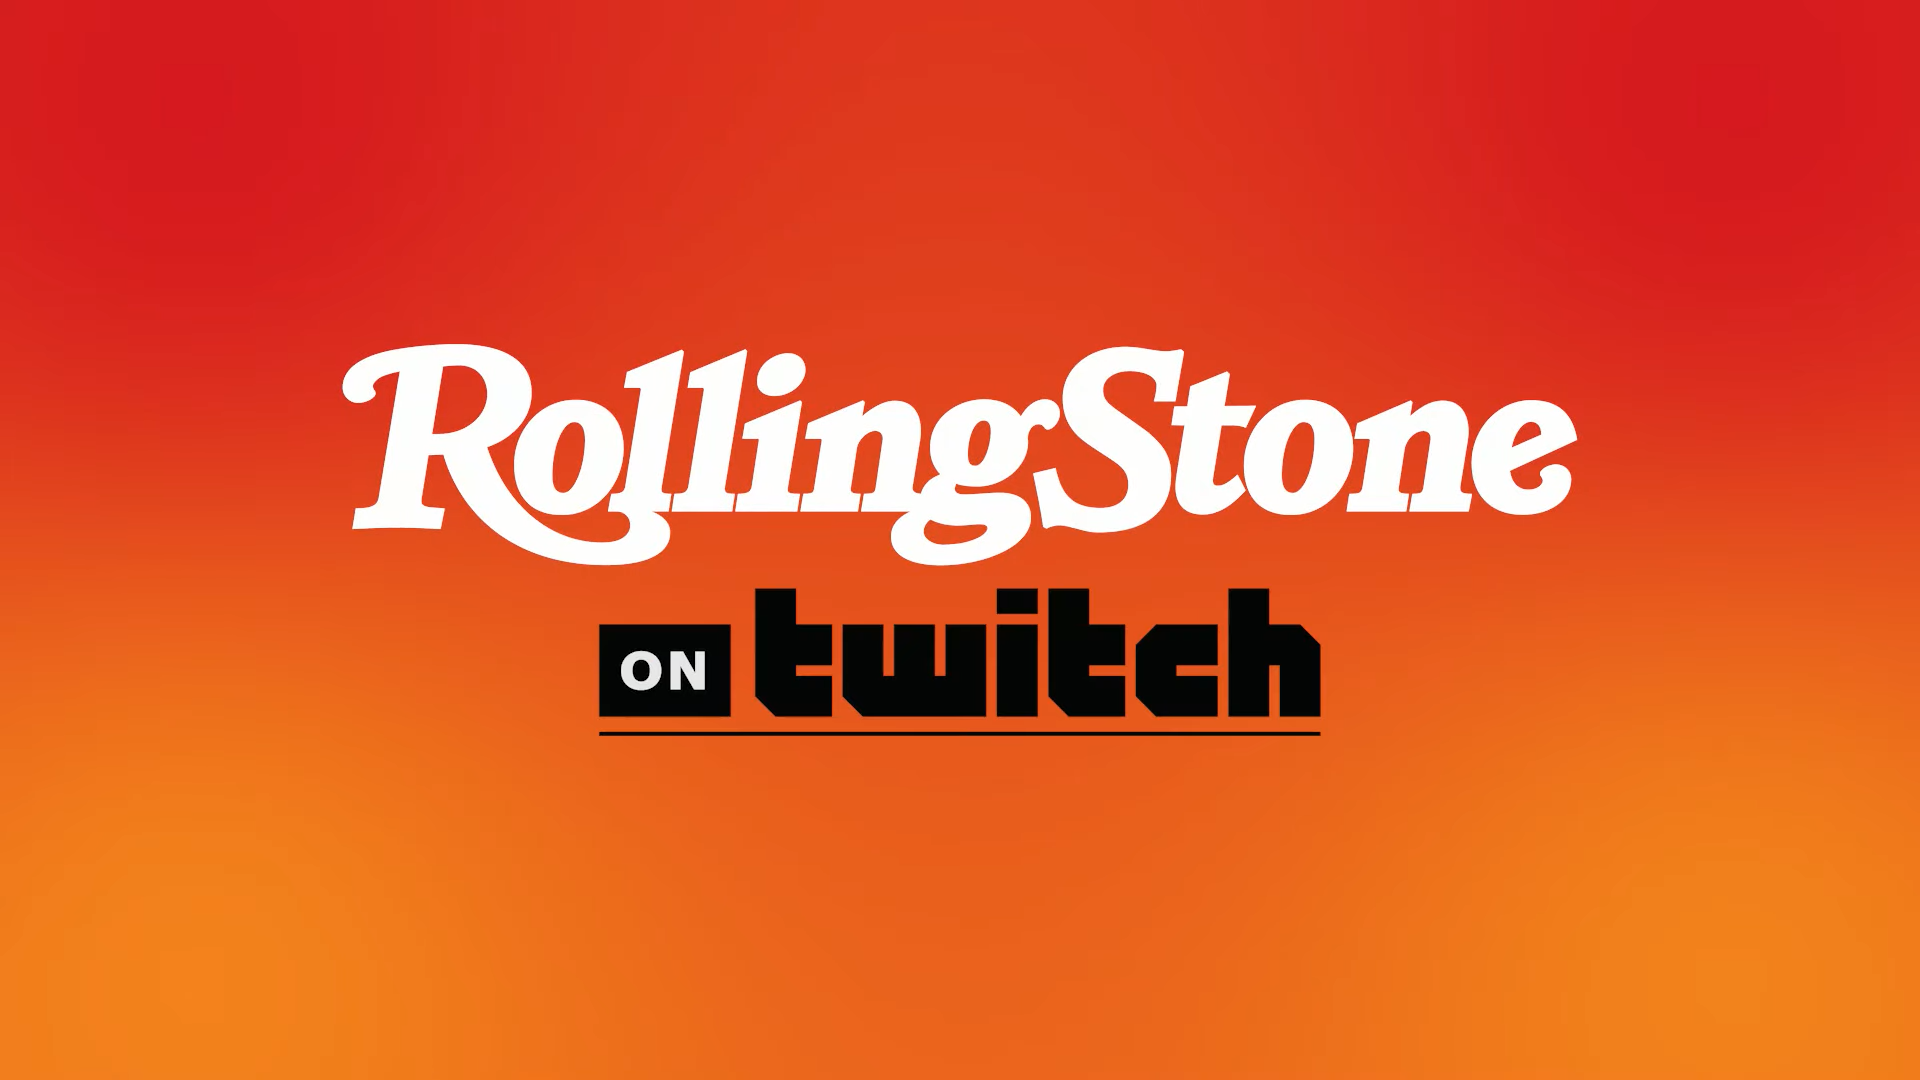 Rolling Stone bring live music from artists to Twitch